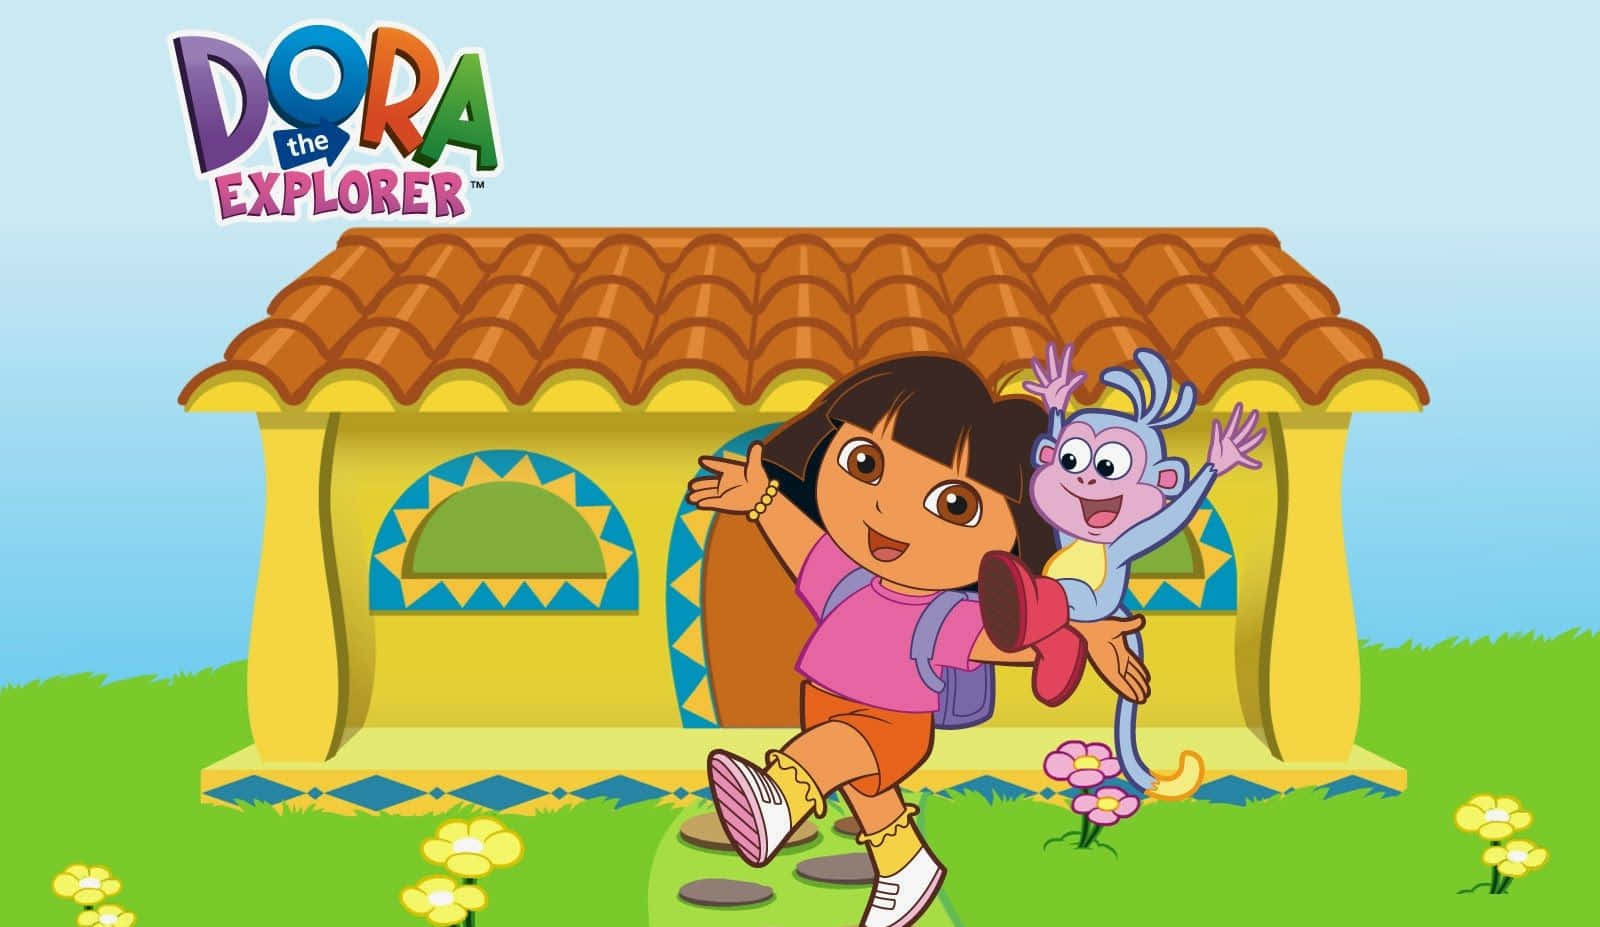 Let's Go On An Adventure with Dora and Her Friends!